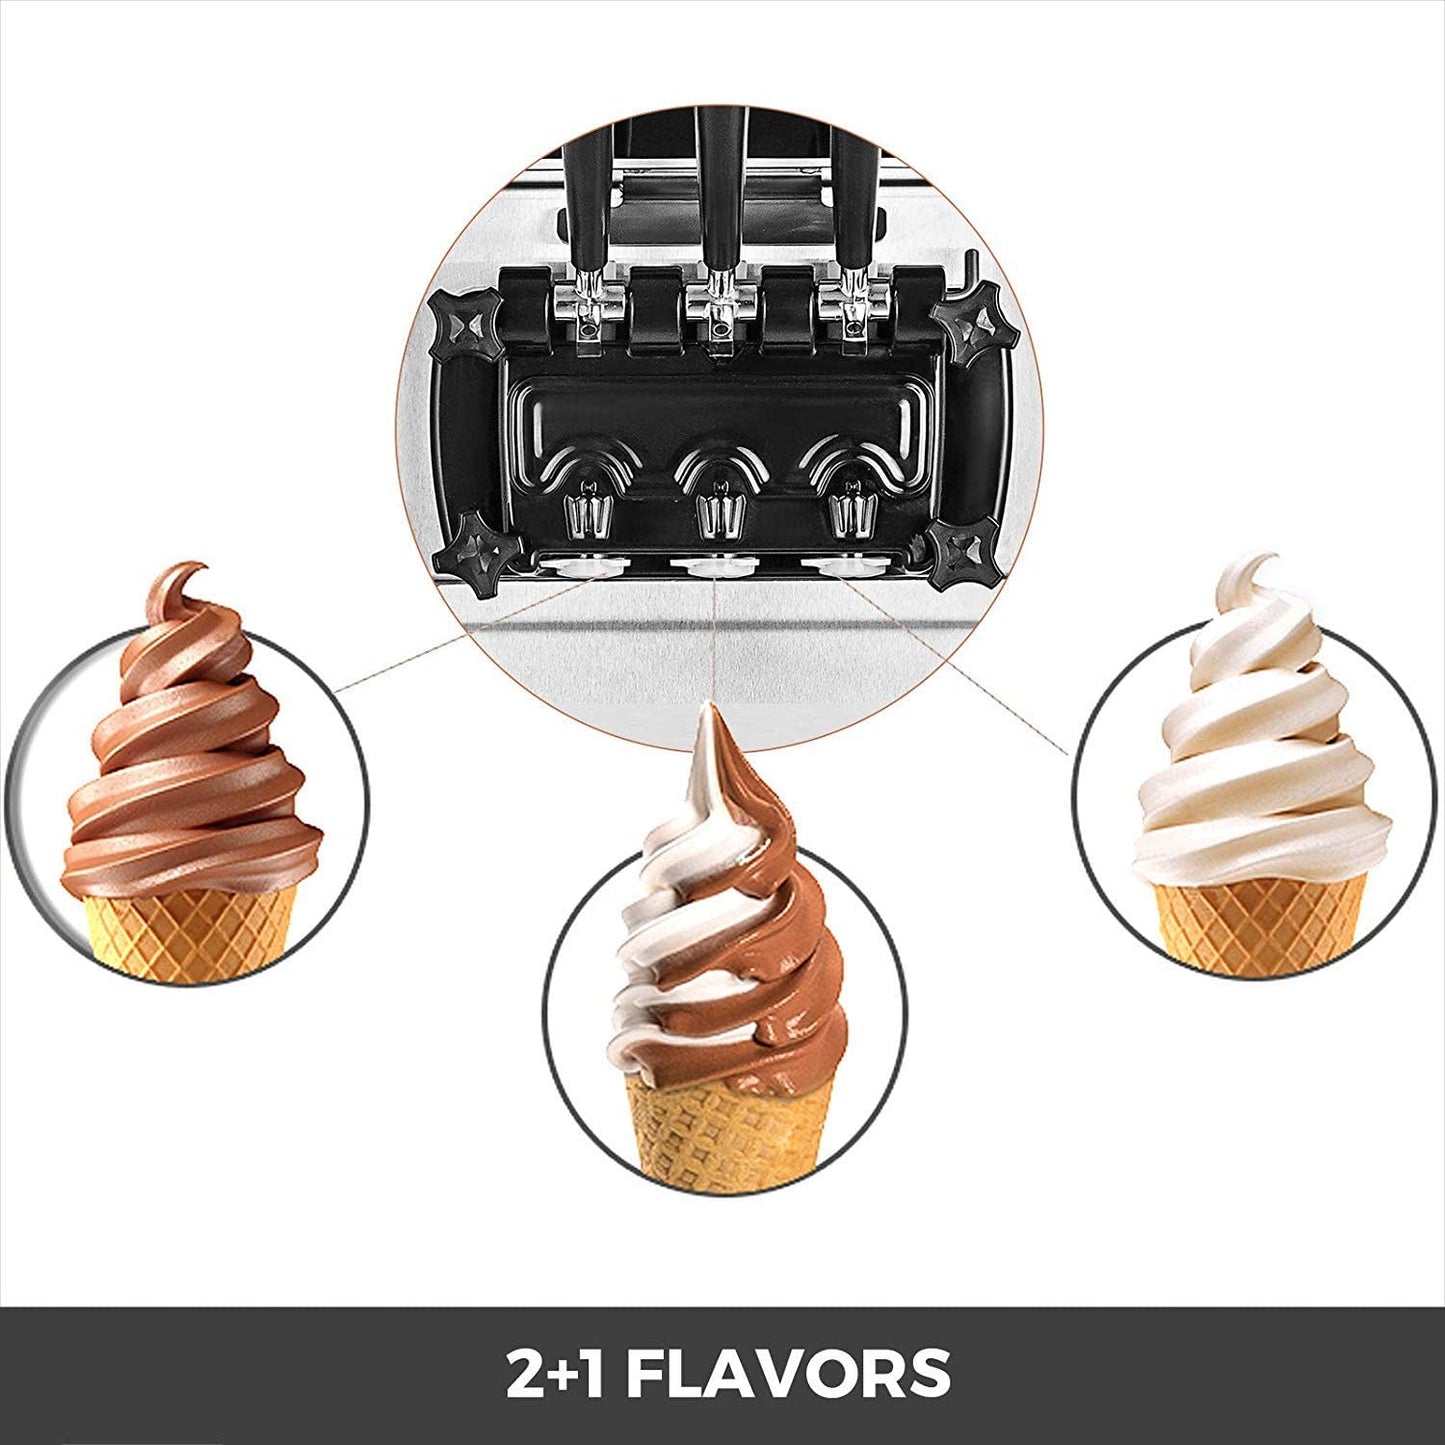 2200W Commercial Soft Ice Cream Machine, 3 Flavors 5.3 to 7.4 Gallons per Hour, Auto Clean, LED Panel